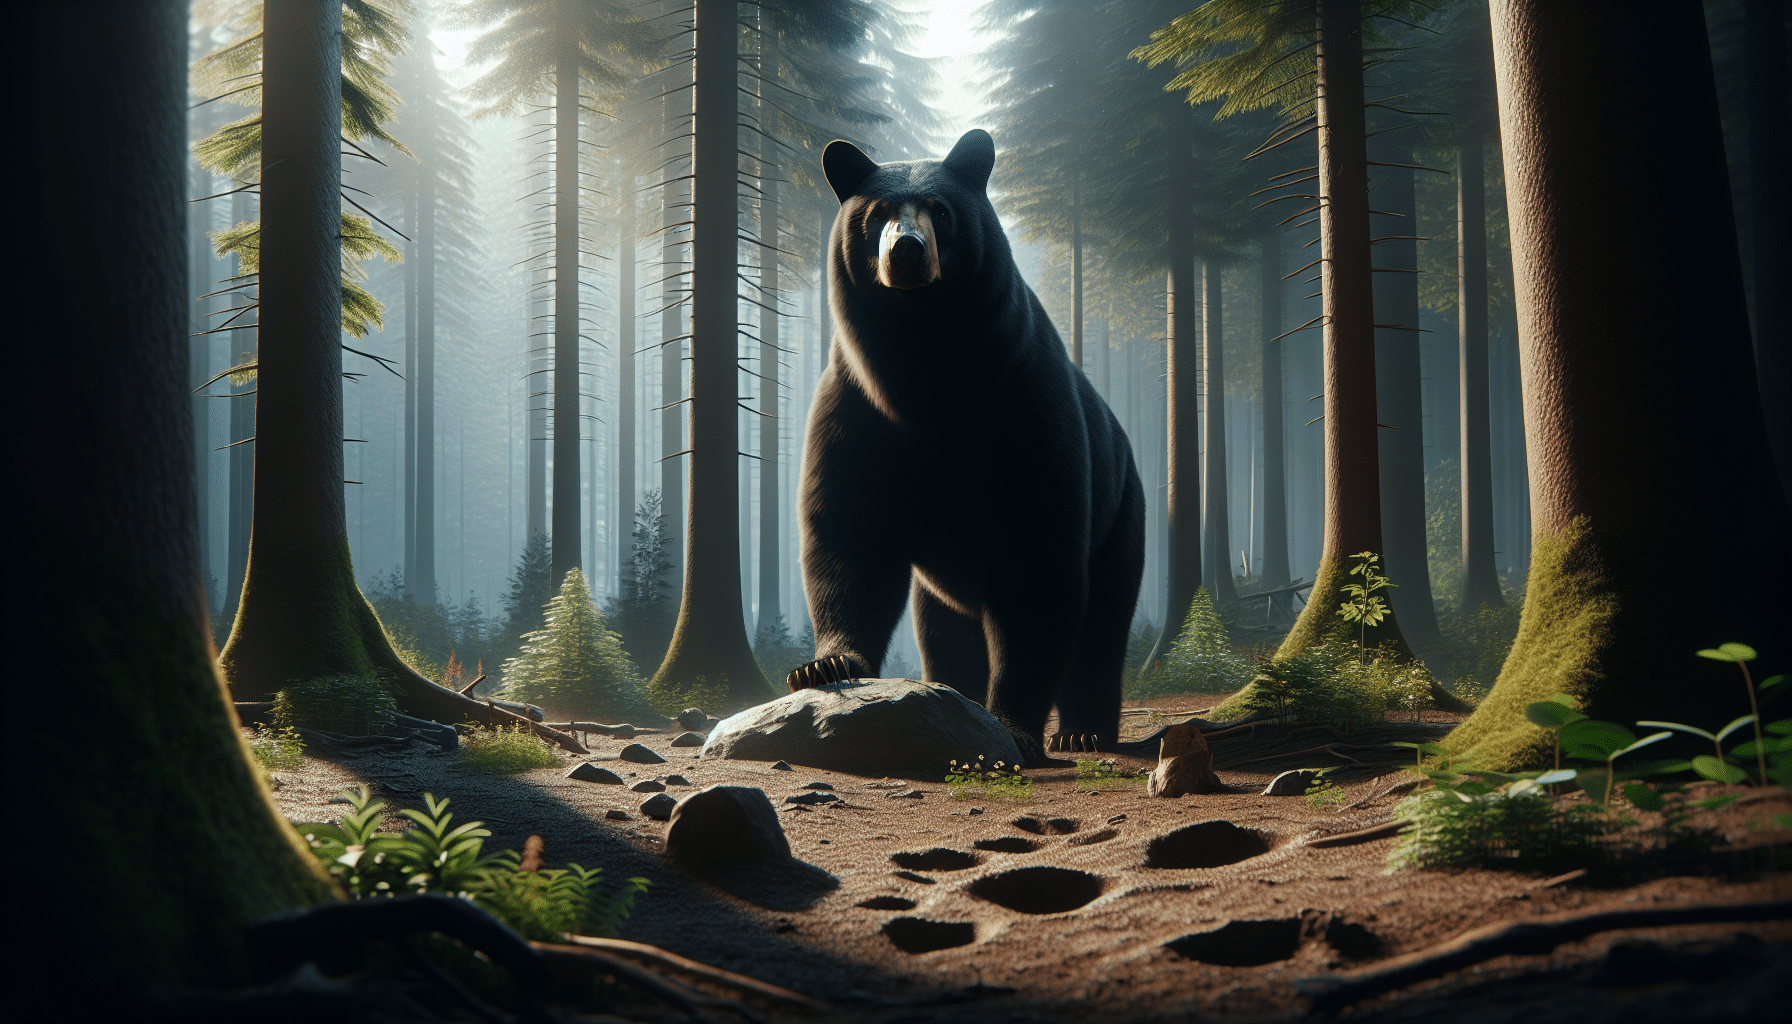 Cinematic visualization of a mature black bear in its natural forest habitat. The bear stands on its hind legs to its full height, displaying its bulk and size against a backdrop of towering trees. Sunlight filters through the canopy, casting a dappled light on the bear's black coat and the surrounding flora. A small stone sits in front of the bear, giving a concrete comparison of the bear's size. A few footprints are visible in the loamy soil, hinting at the weight of the creature that made them. All elements should be depicted realistically and with no indication of text or branding.